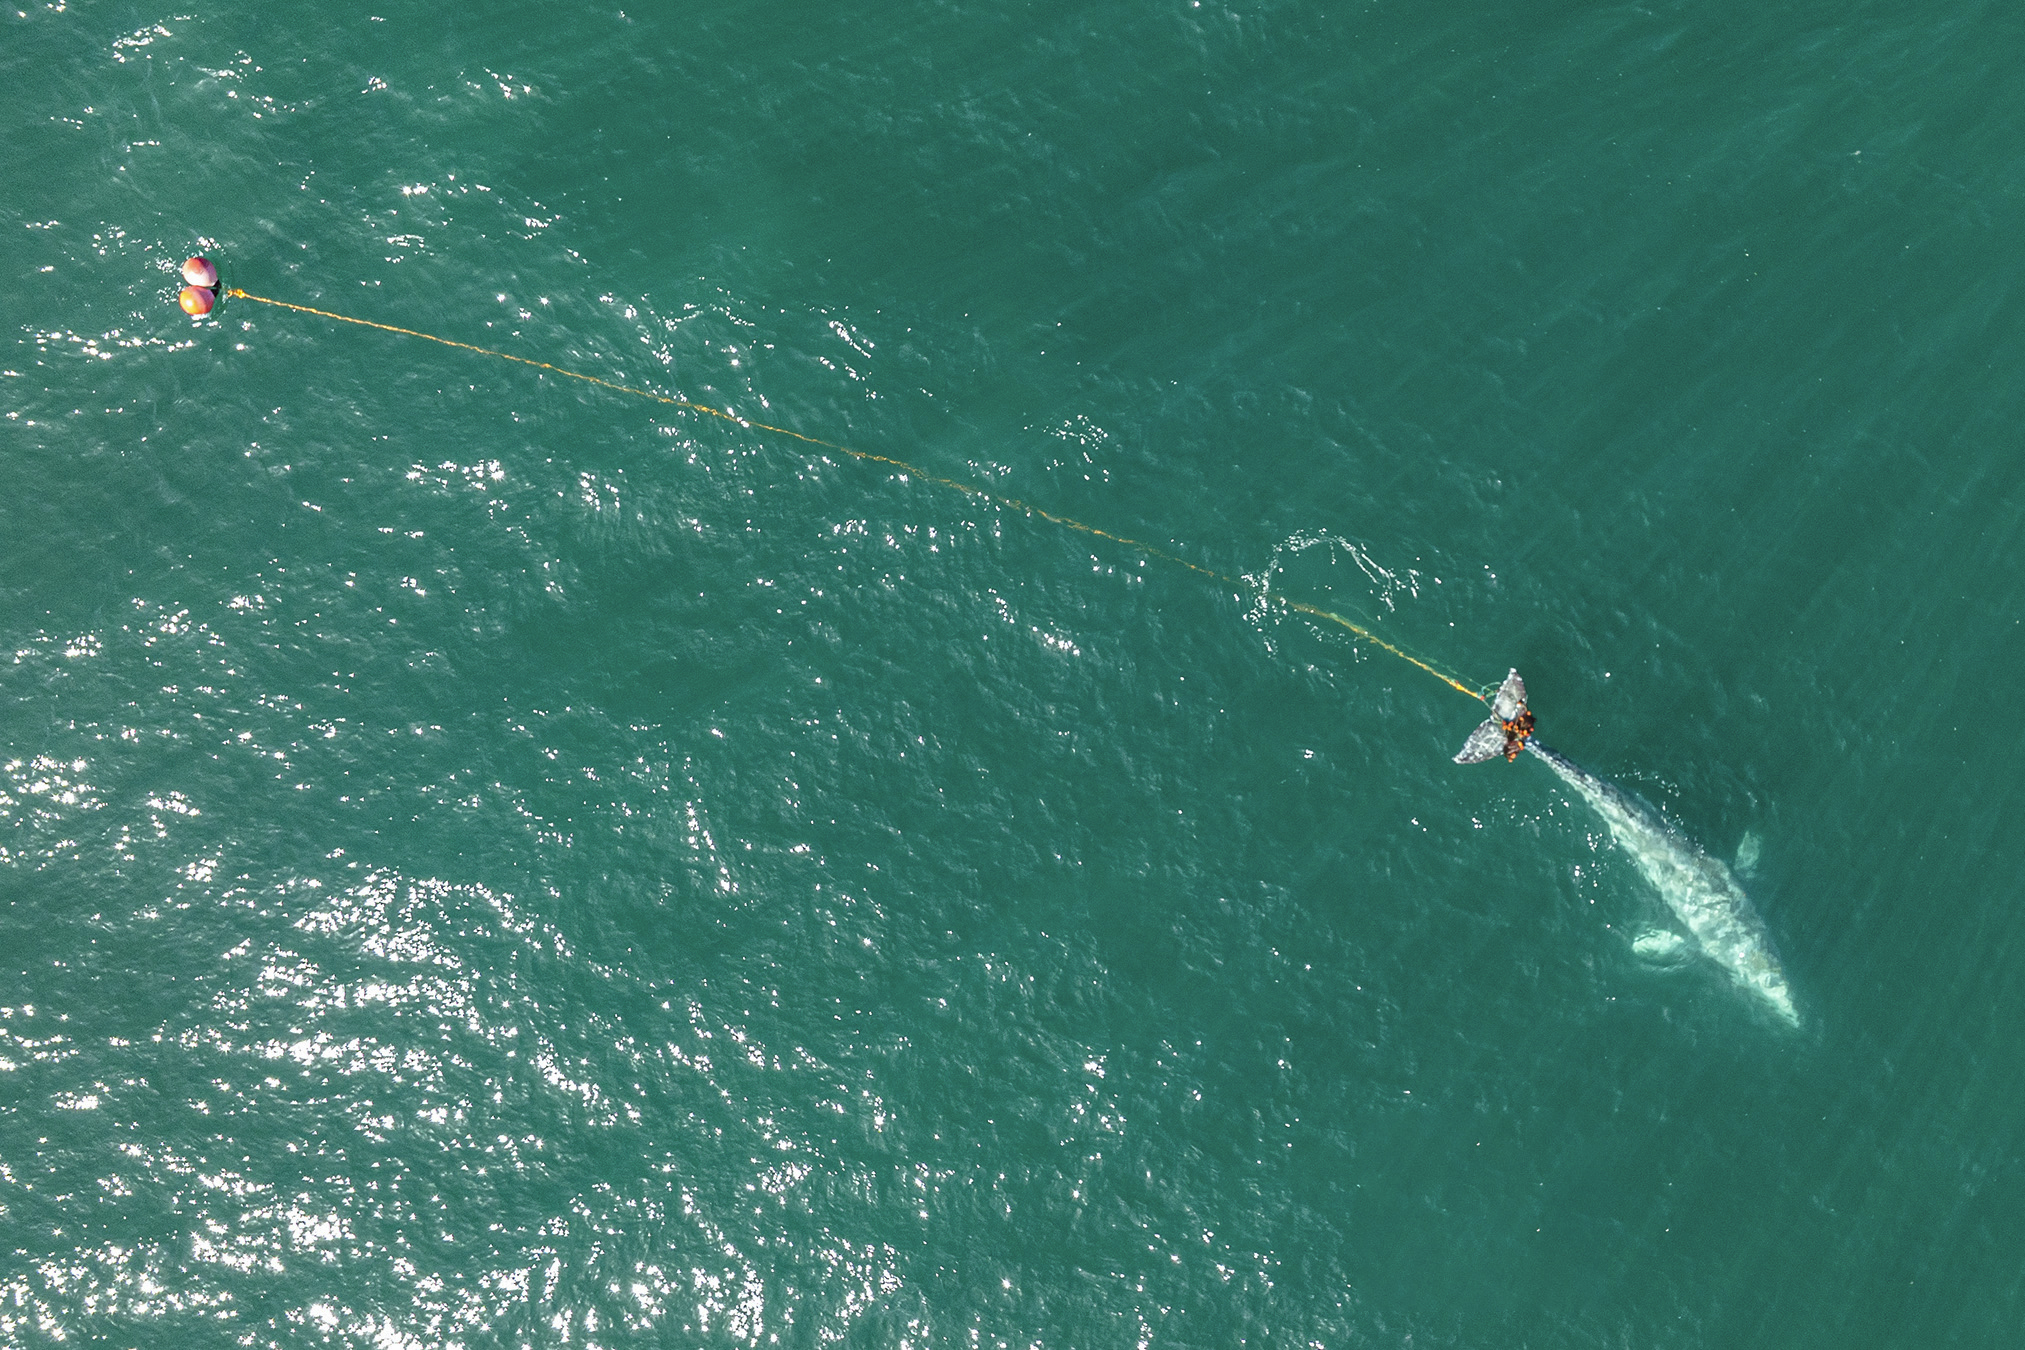 A boat creates ripples in green water, tethered to a buoy by a long rope.